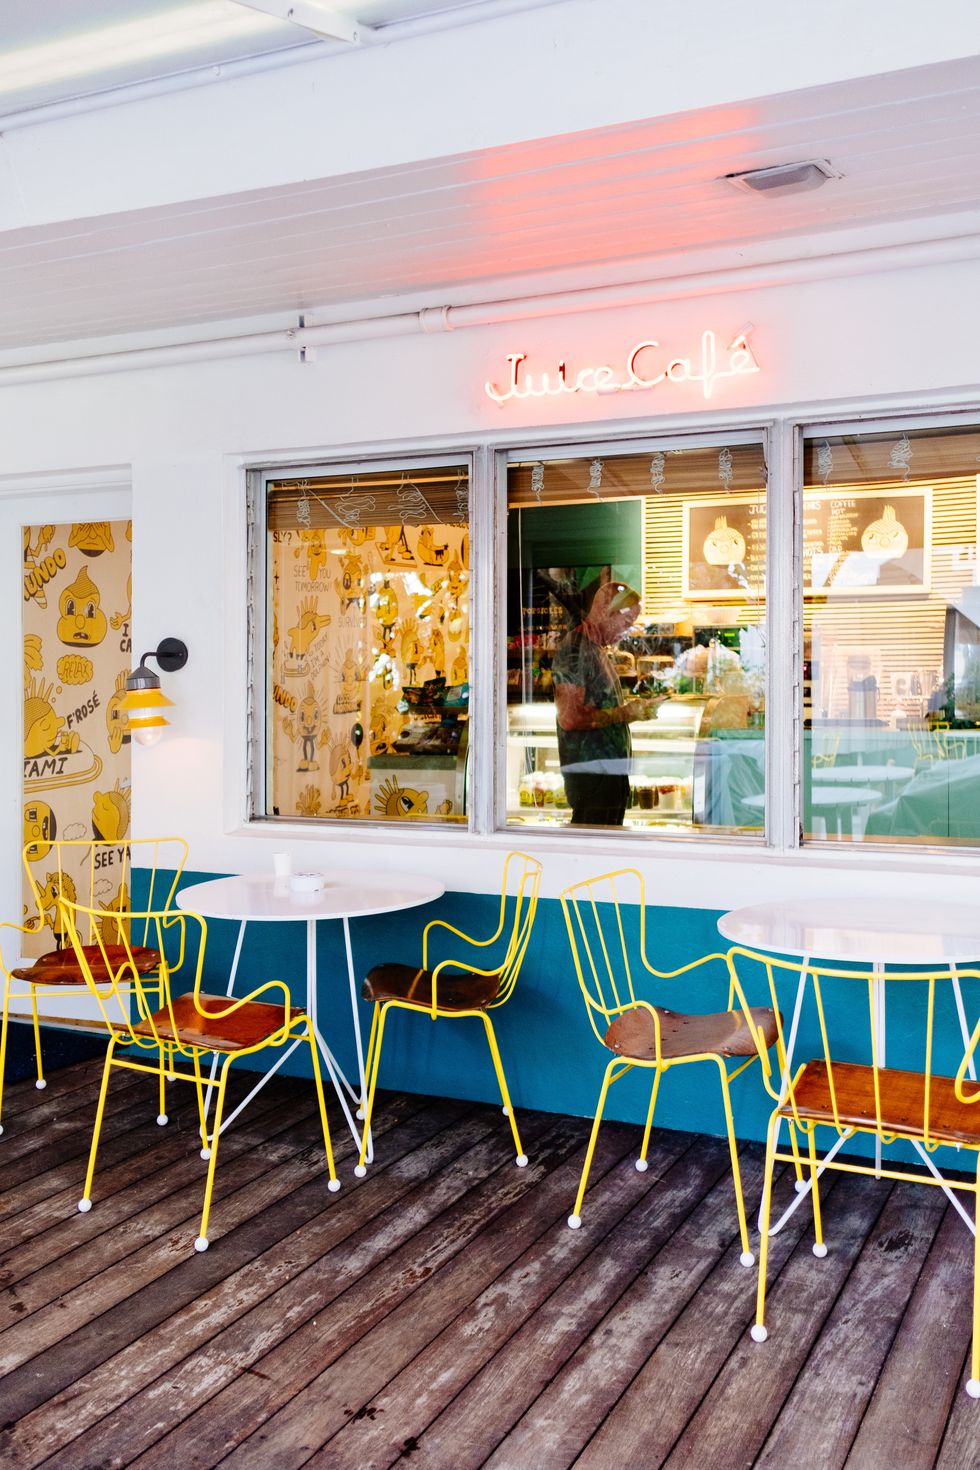 Room, Turquoise, Furniture, Building, Table, Interior design, Wall, Restaurant, Chair, House, 